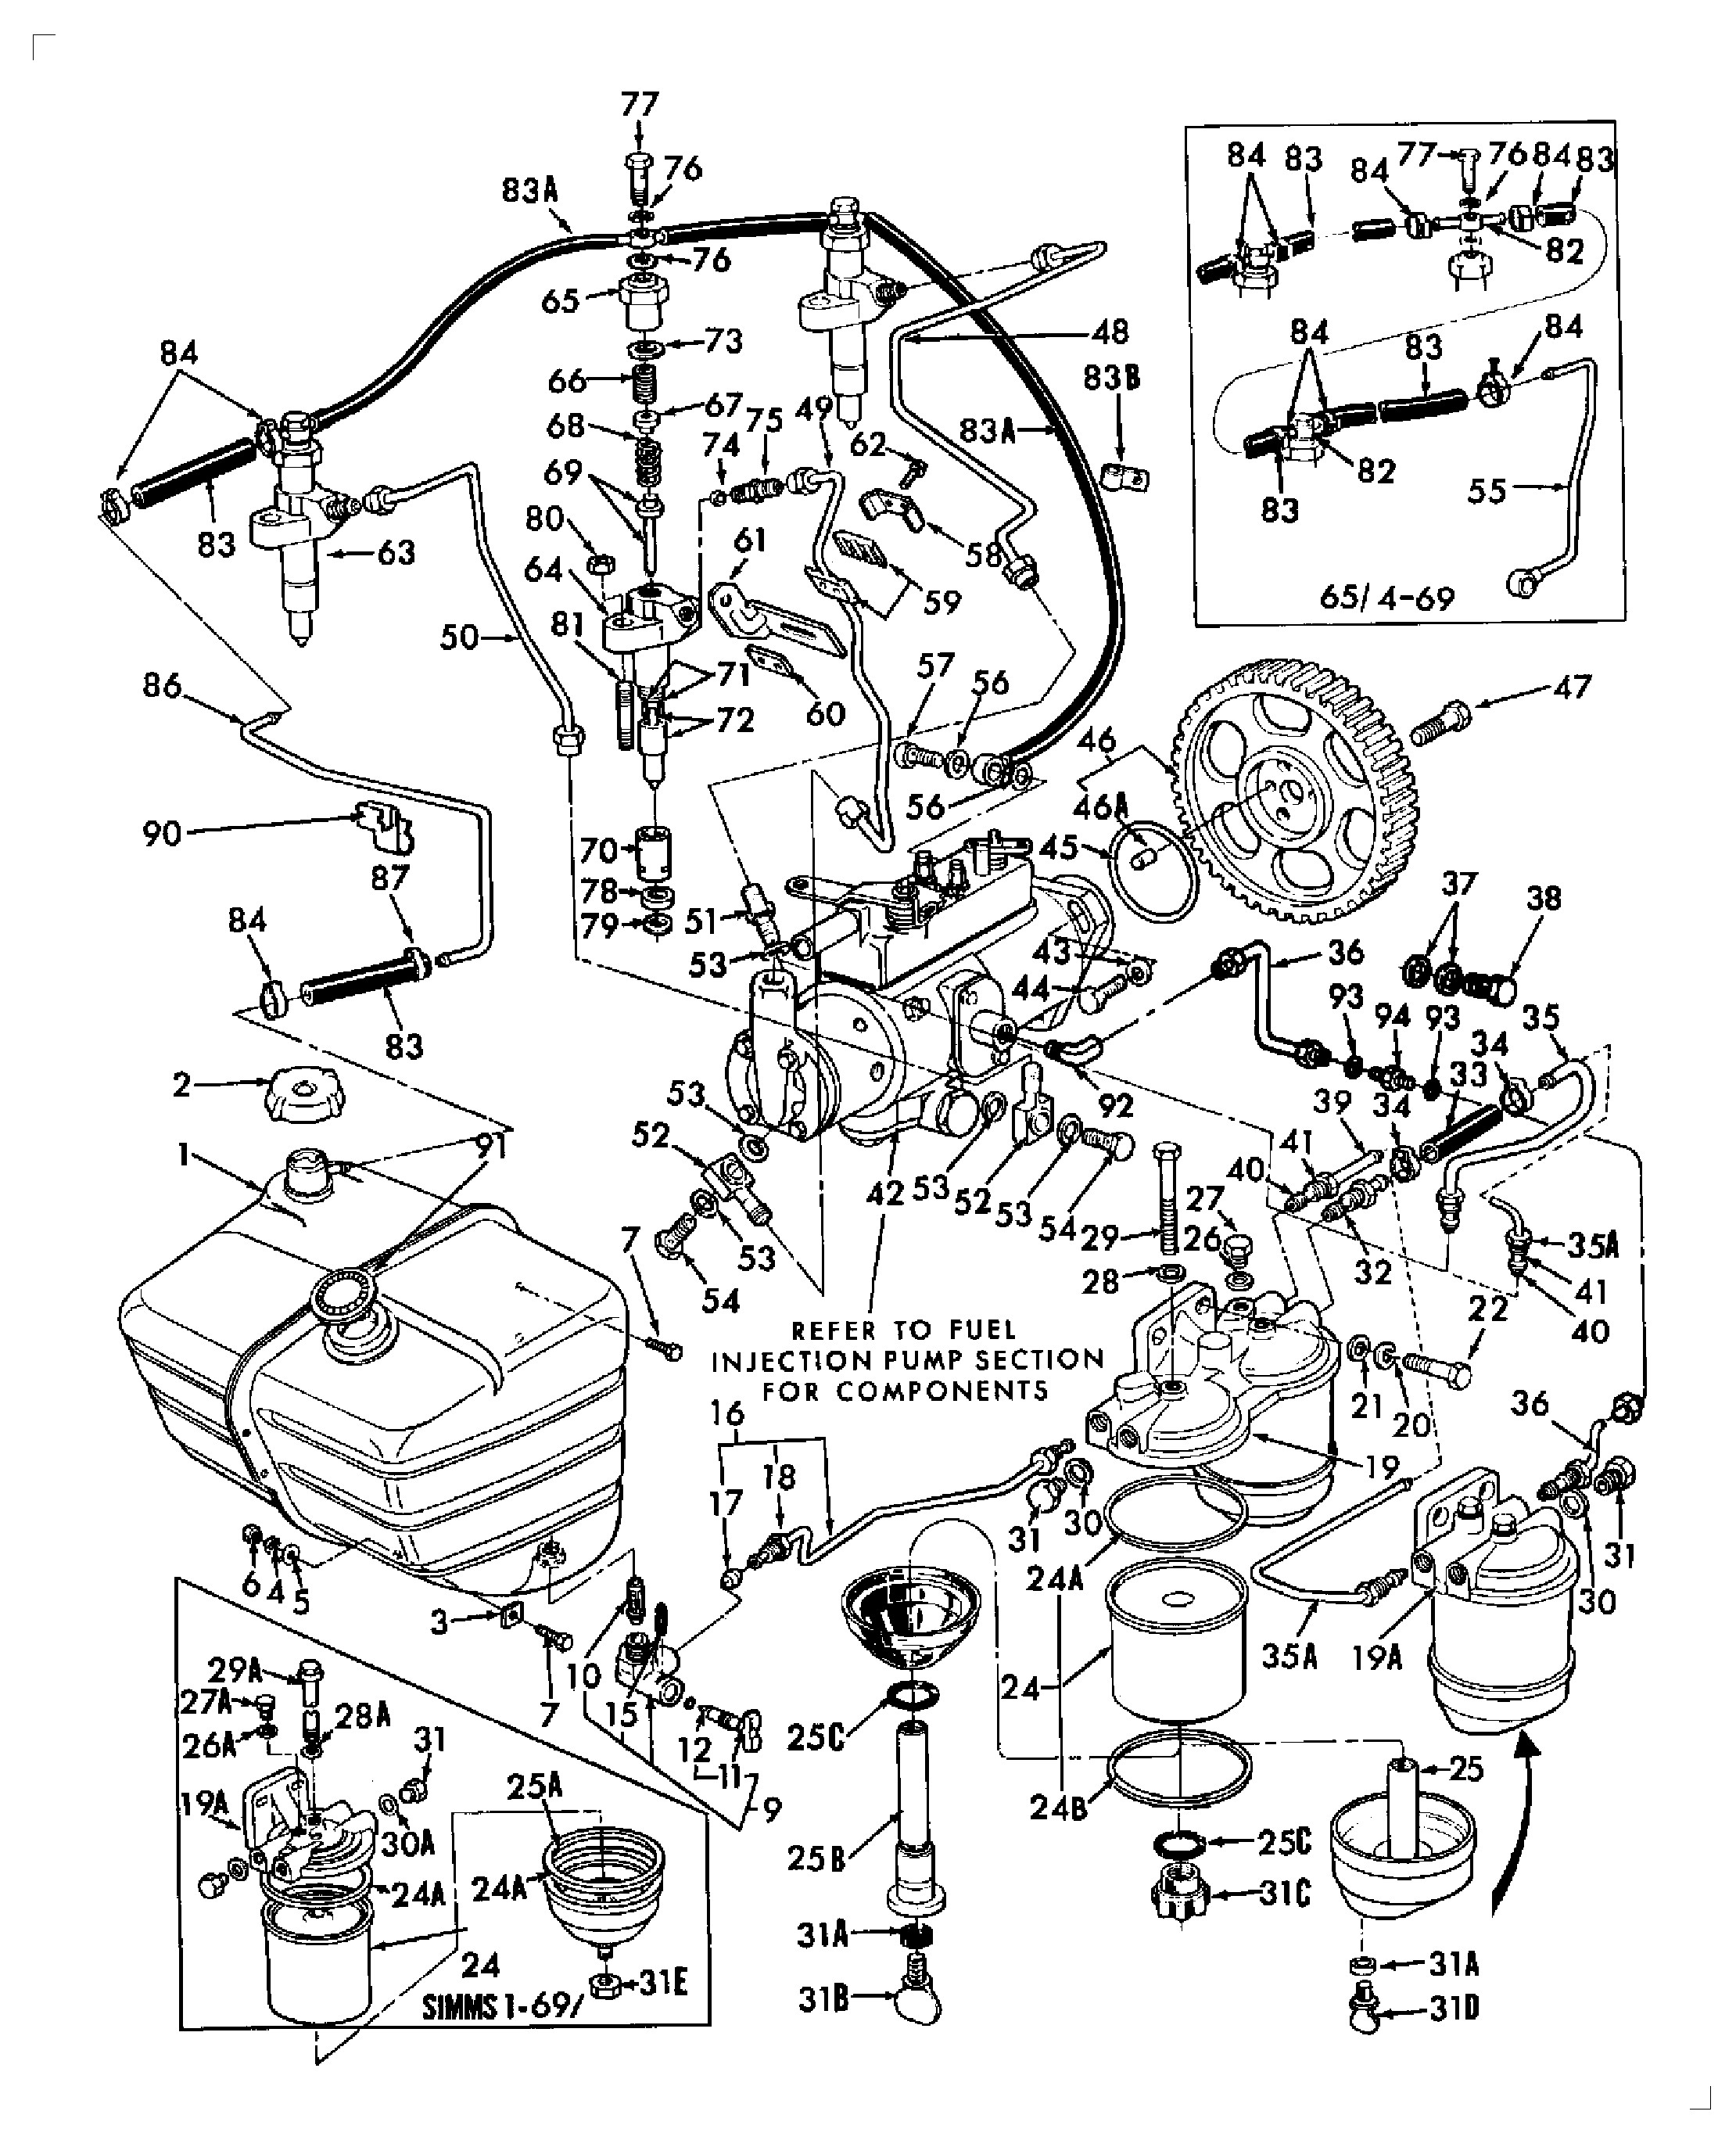 Ford 4000 Tractor Ignition Switch Wiring Diagram from detoxicrecenze.com